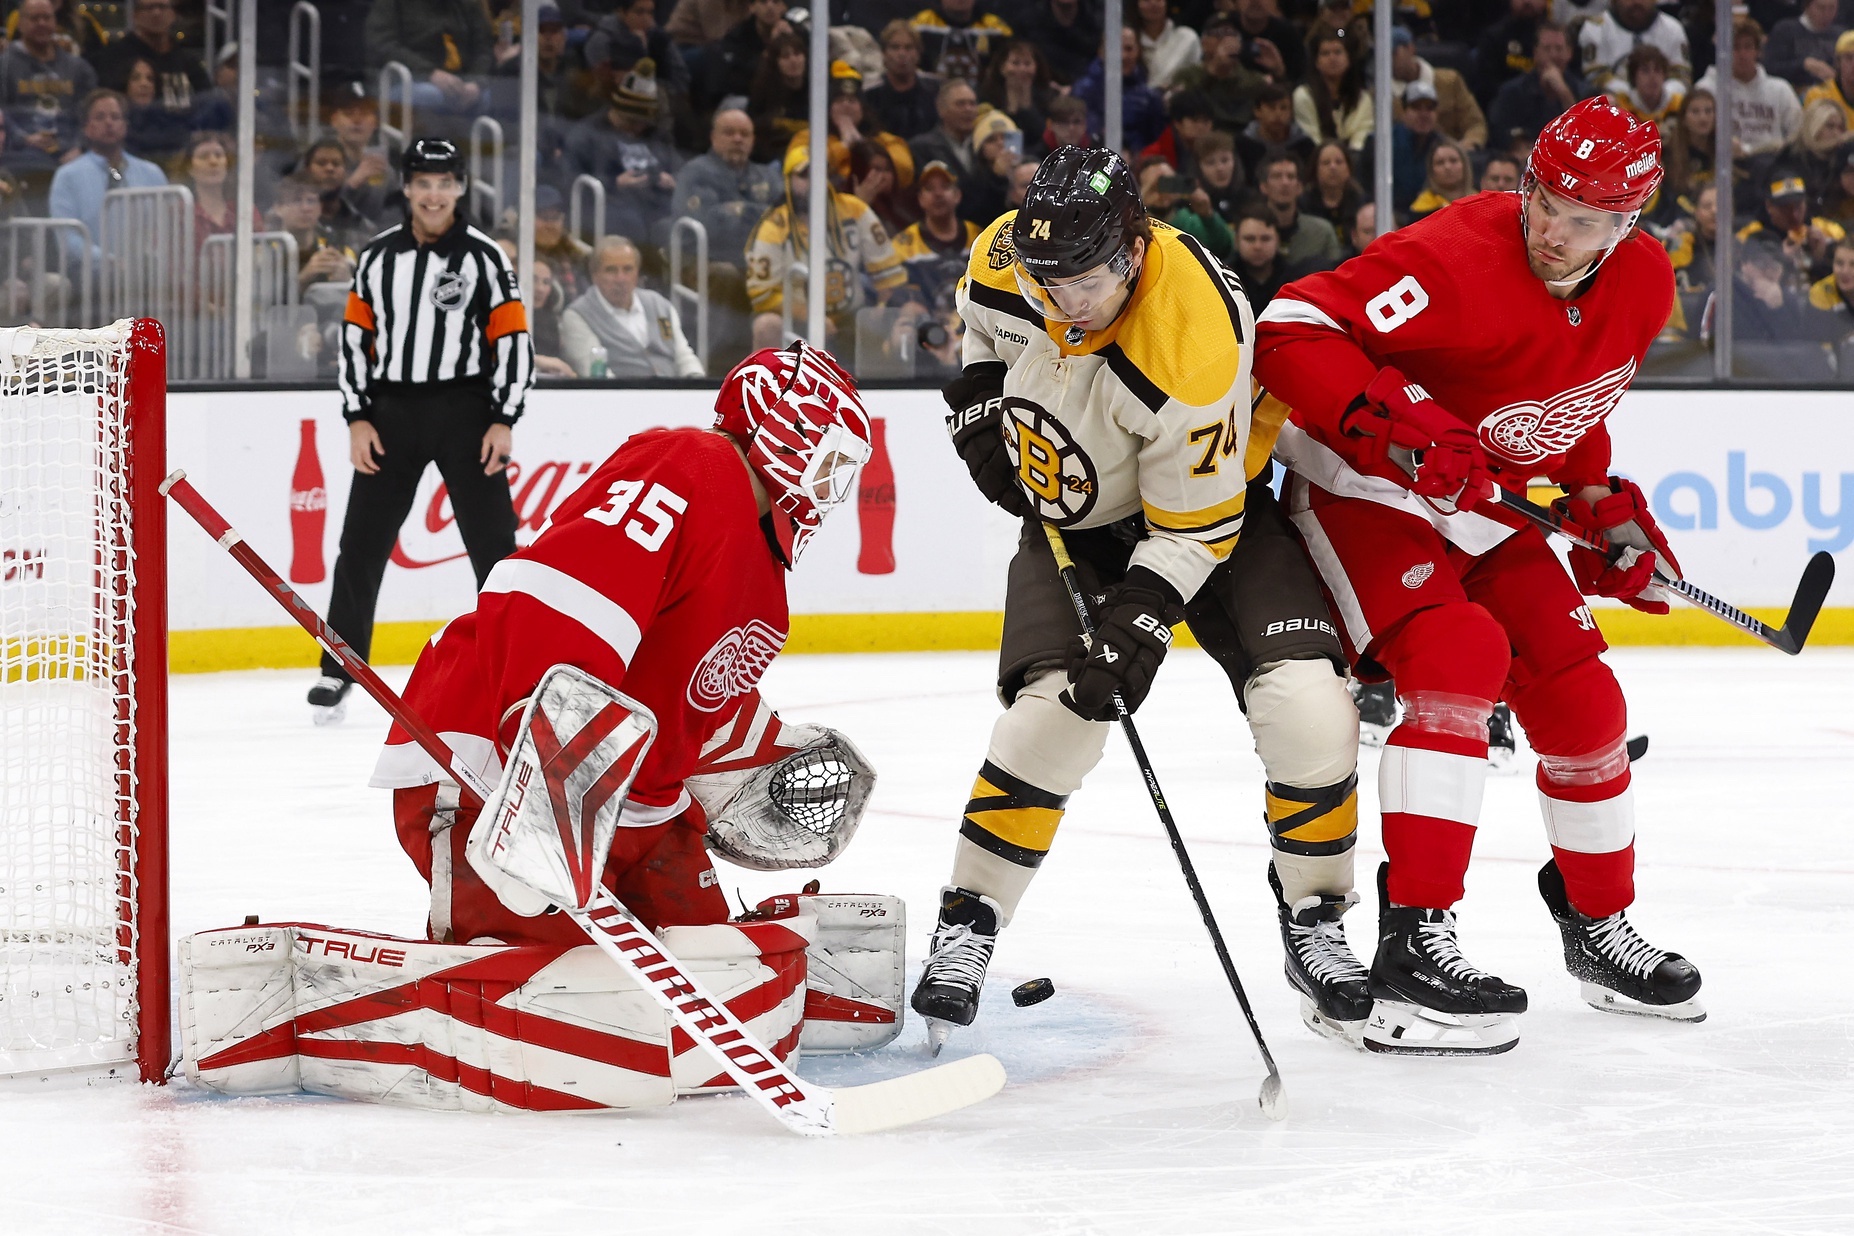 Nov 24, 2023; Boston, Massachusetts, USA; Boston Bruins left wing Jake DeBrusk (74) looks for a rebound in front of Detroit Red Wings goaltender Ville Husso (35) during the first period at TD Garden. Mandatory Credit: Winslow Townson-USA TODAY Sports